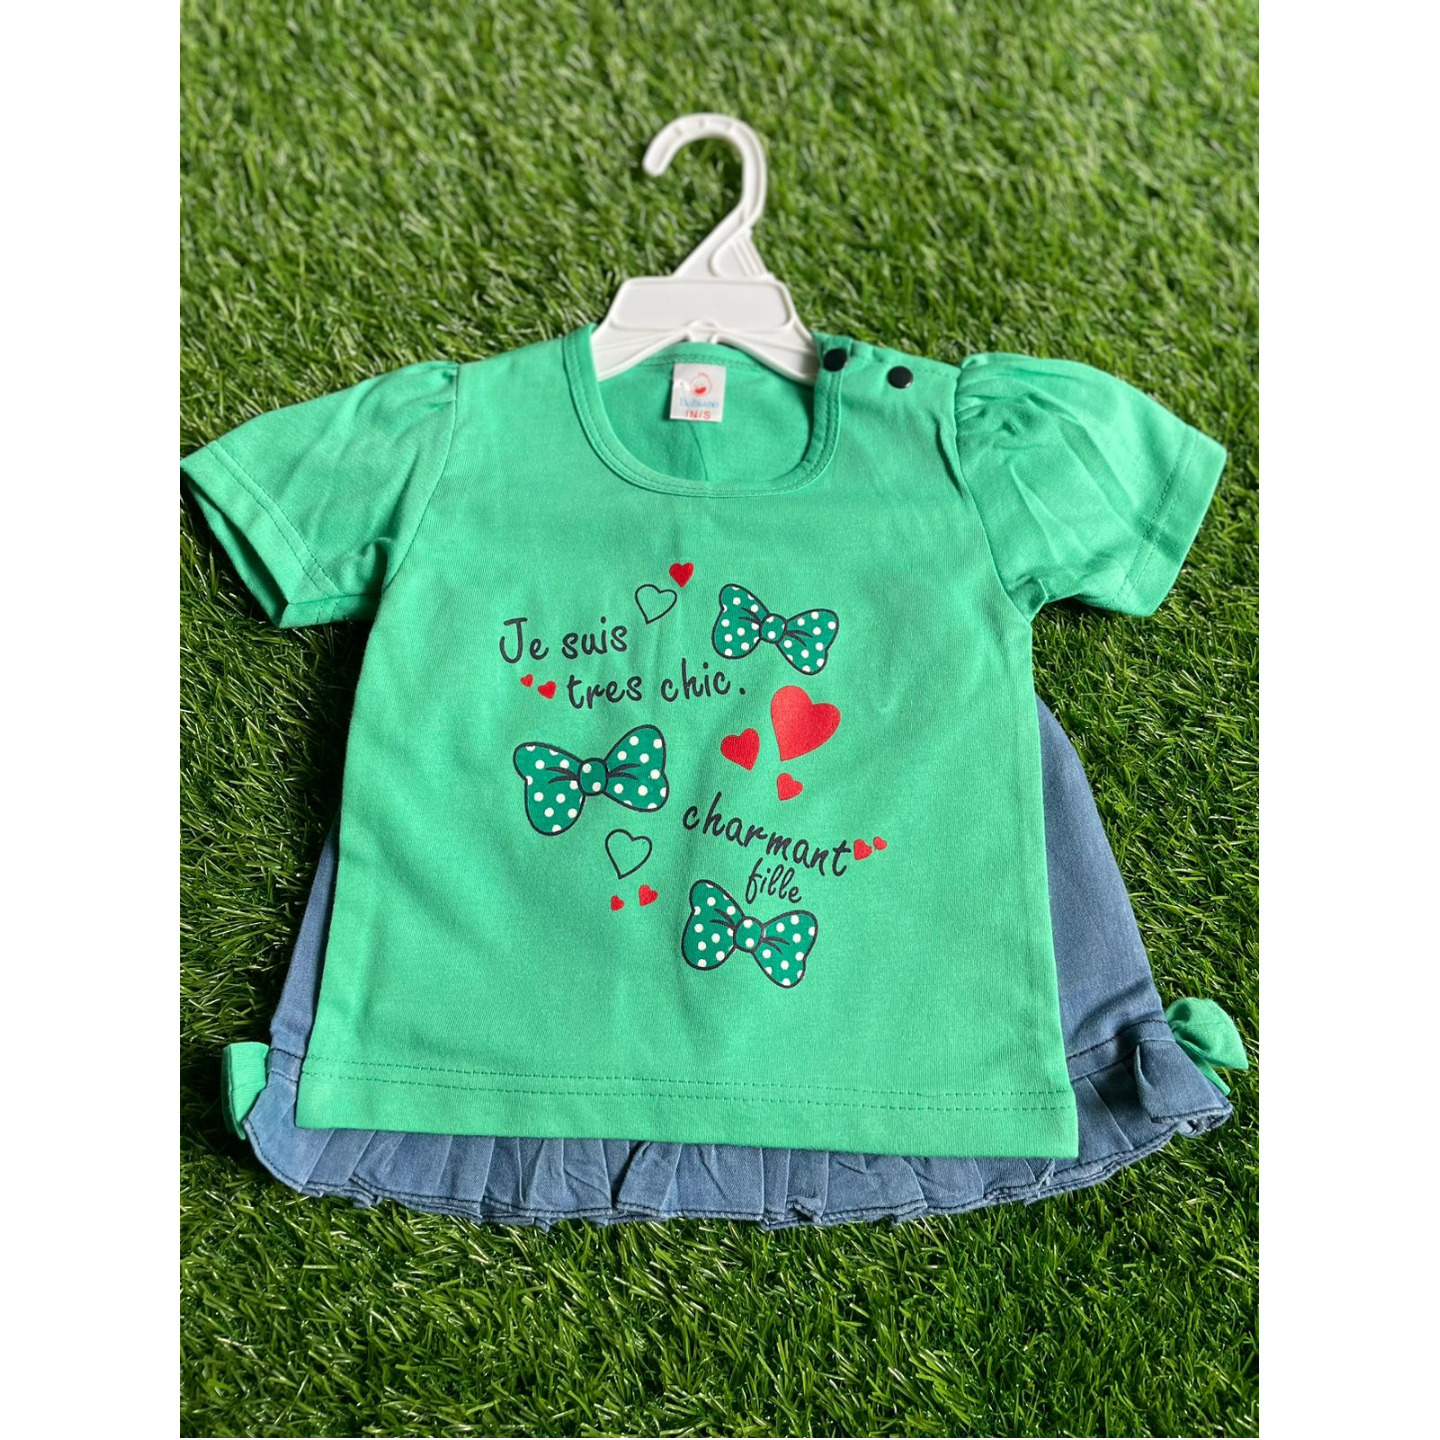 Babiano Baby Infant Kids Babygirl Skirt Top Rs 580 Only 3months-3.5 Years